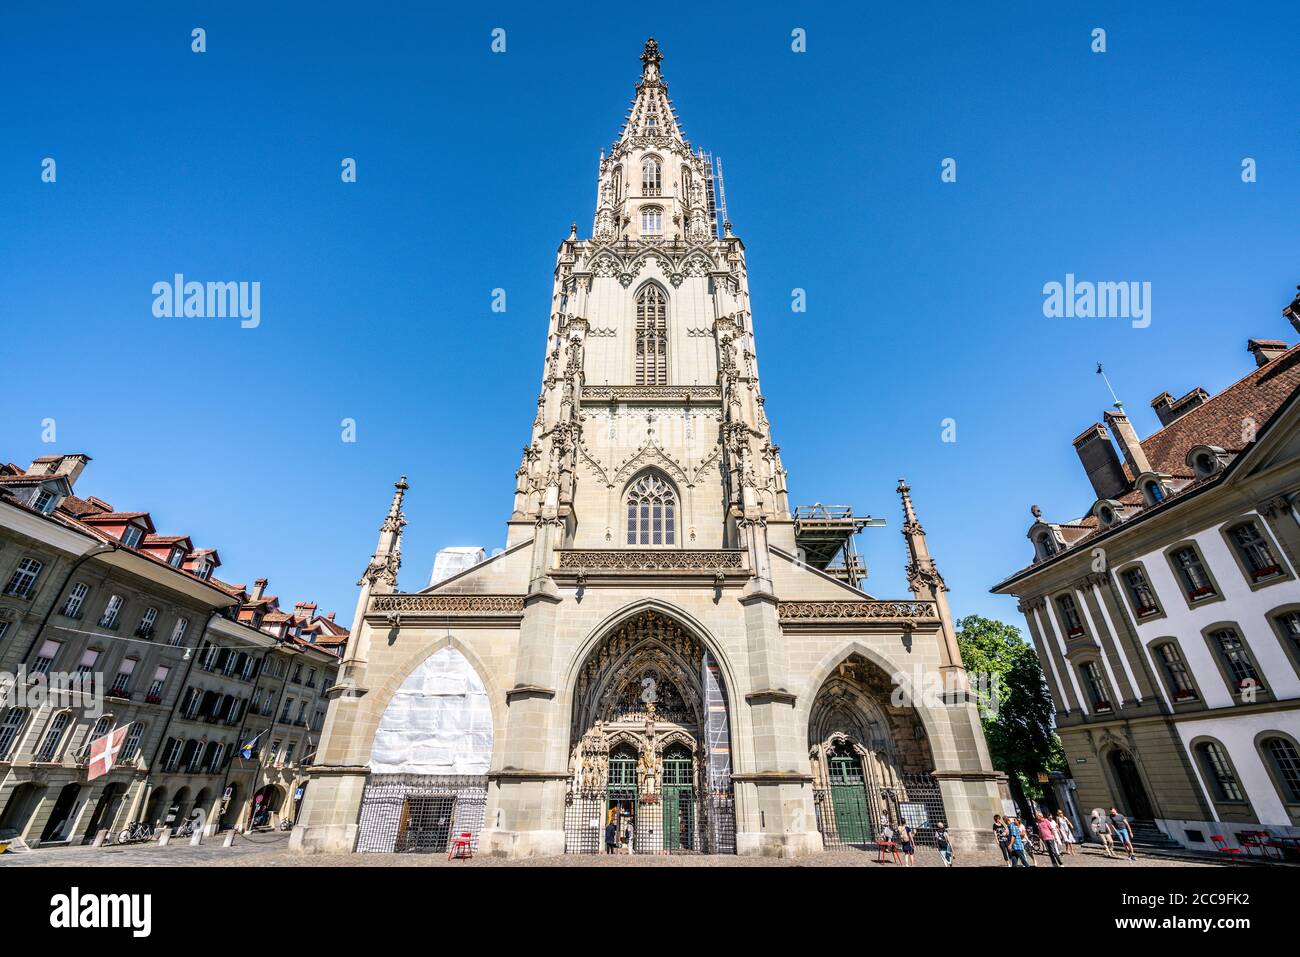 Bern Switzerland , 27 June 2020 : Wide angle facade view of the Bern Minster St. Vincent protestant church building a Swiss Reformed cathedral in Bern Stock Photo